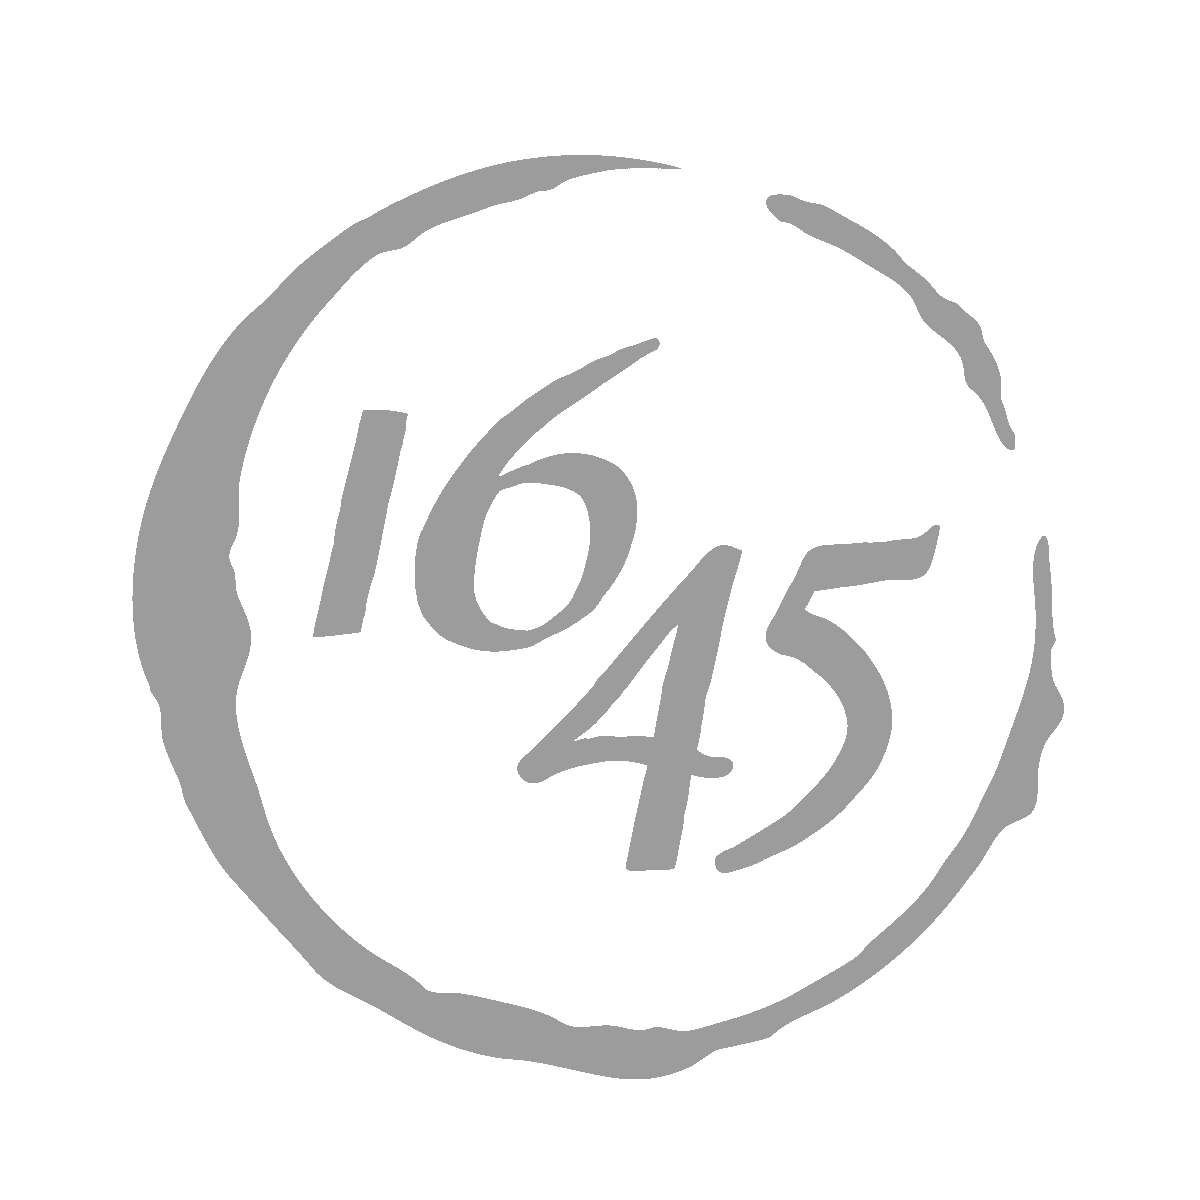 About – 1645 Coffee Roasters